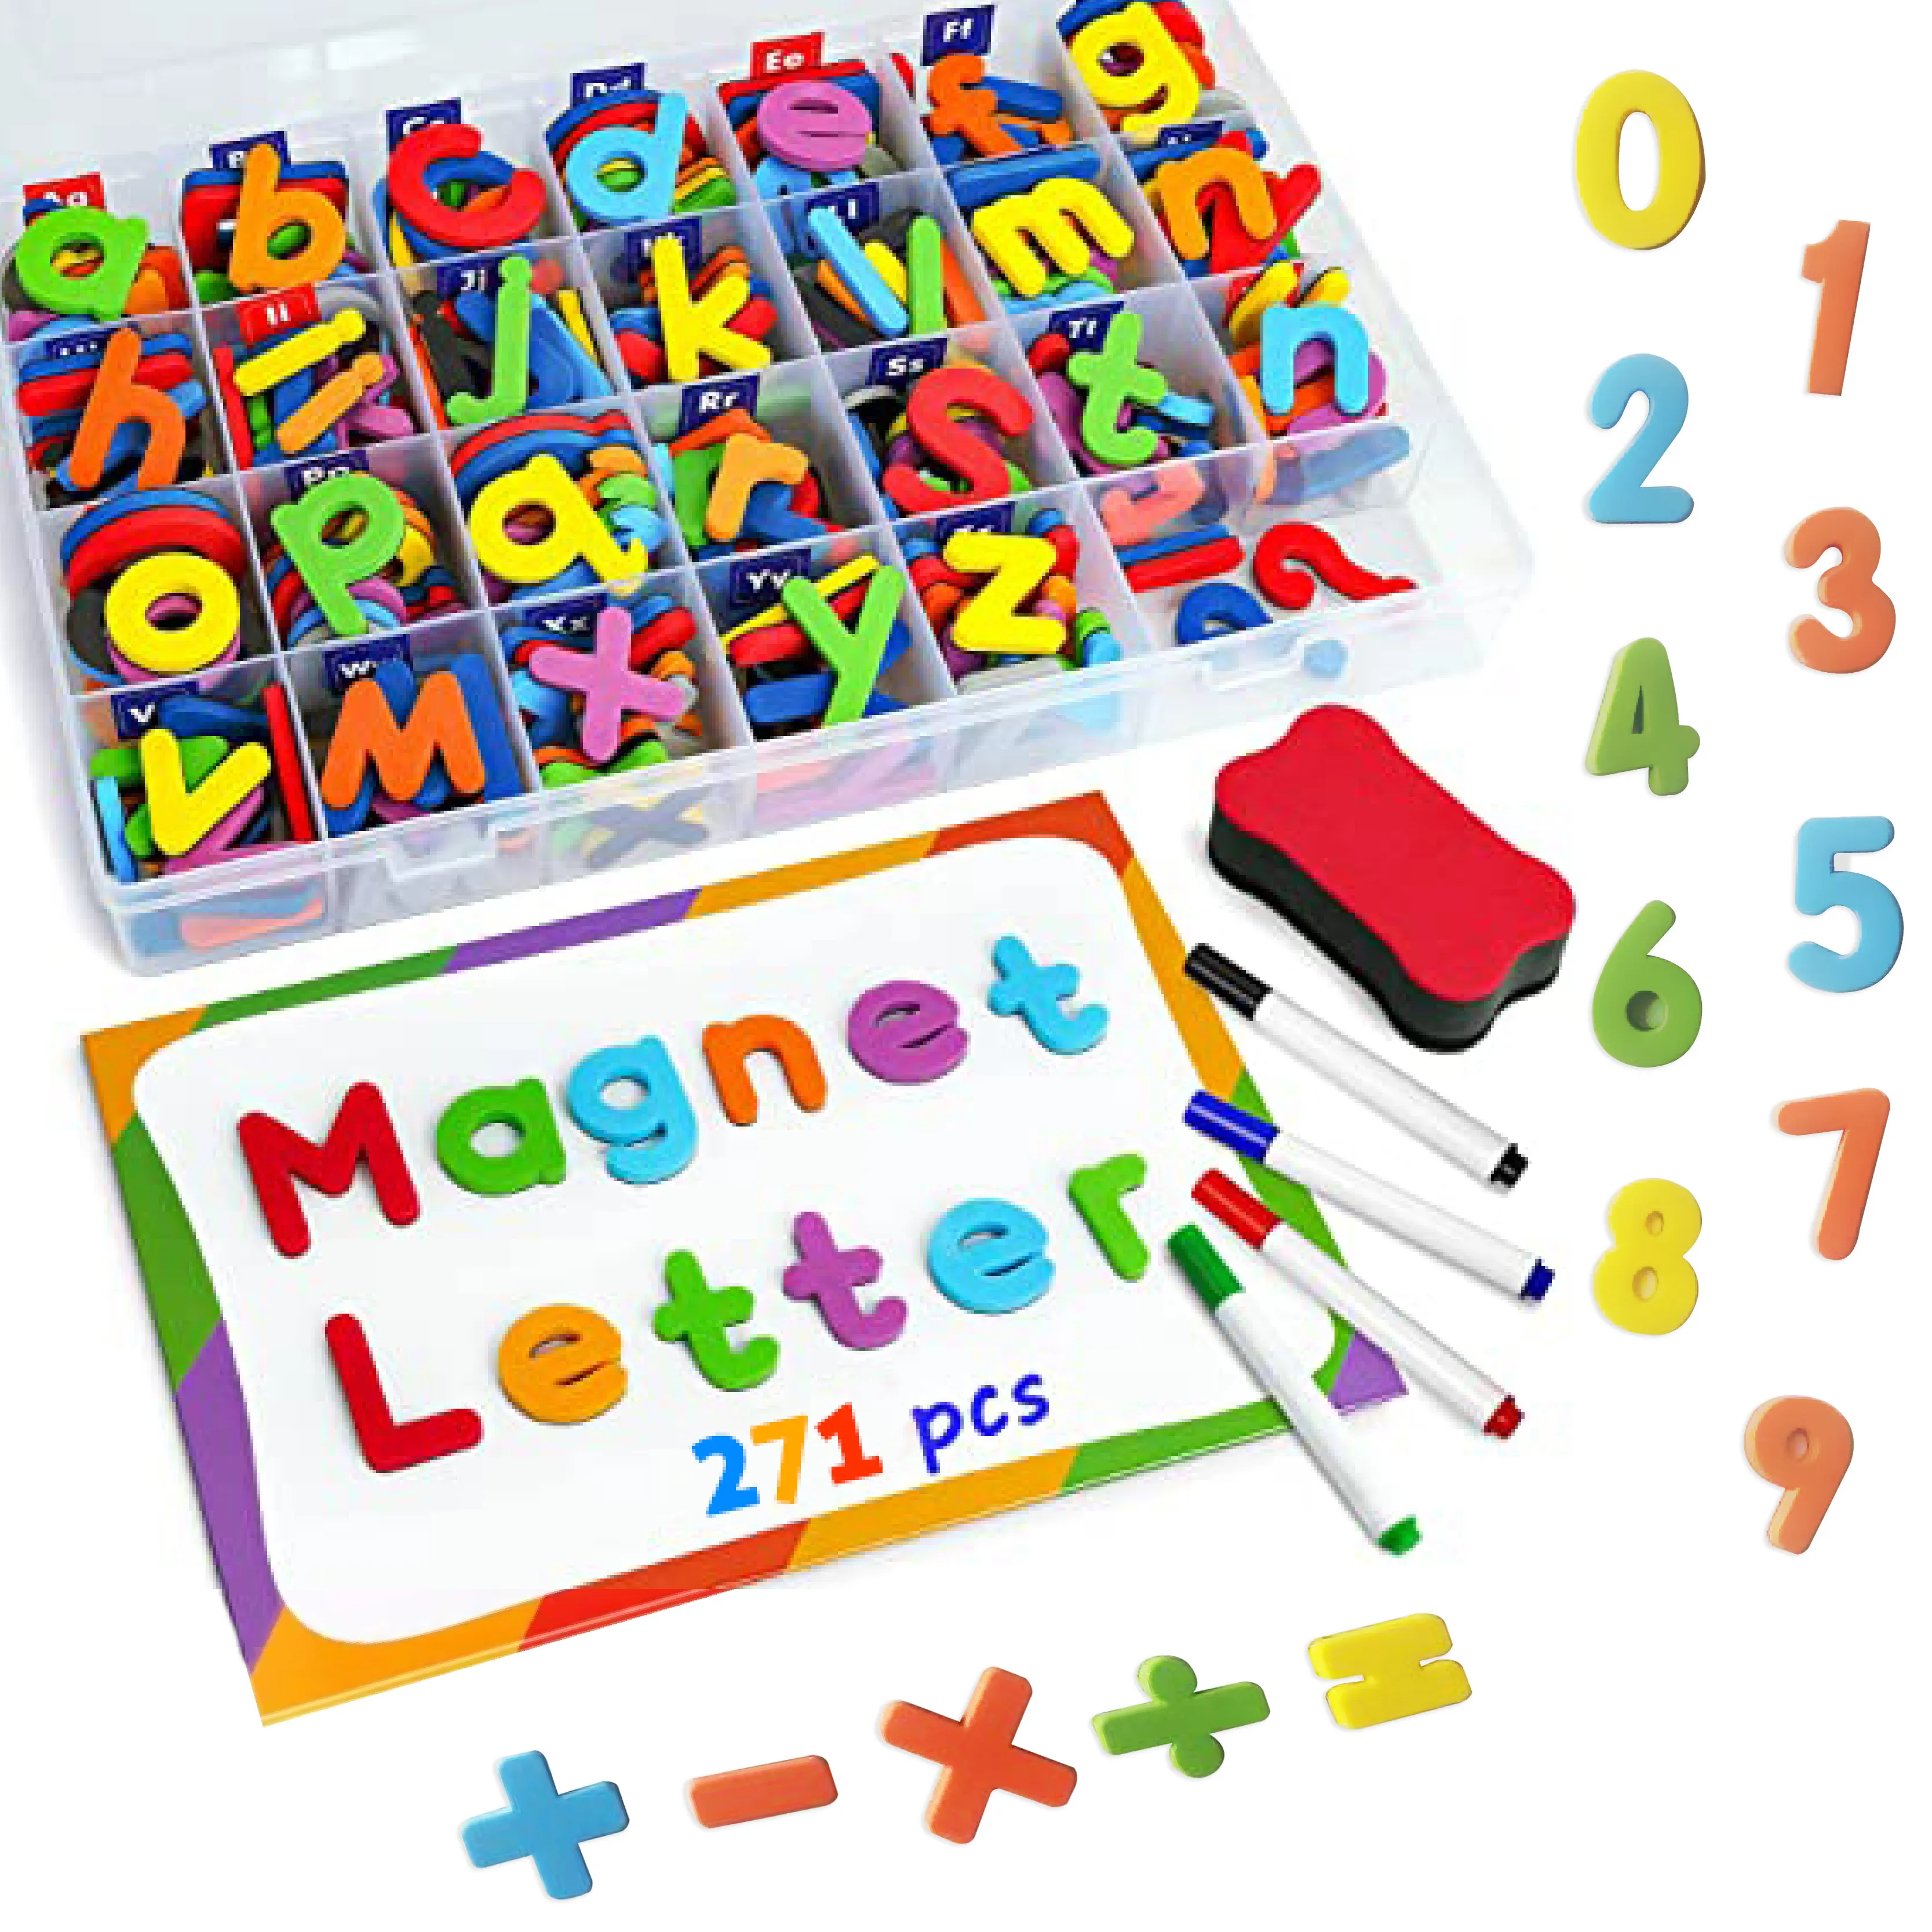 271 pcs newest ABC English Magnetic Alphabets sets with magnet board spelling game toys for kids English educational toy